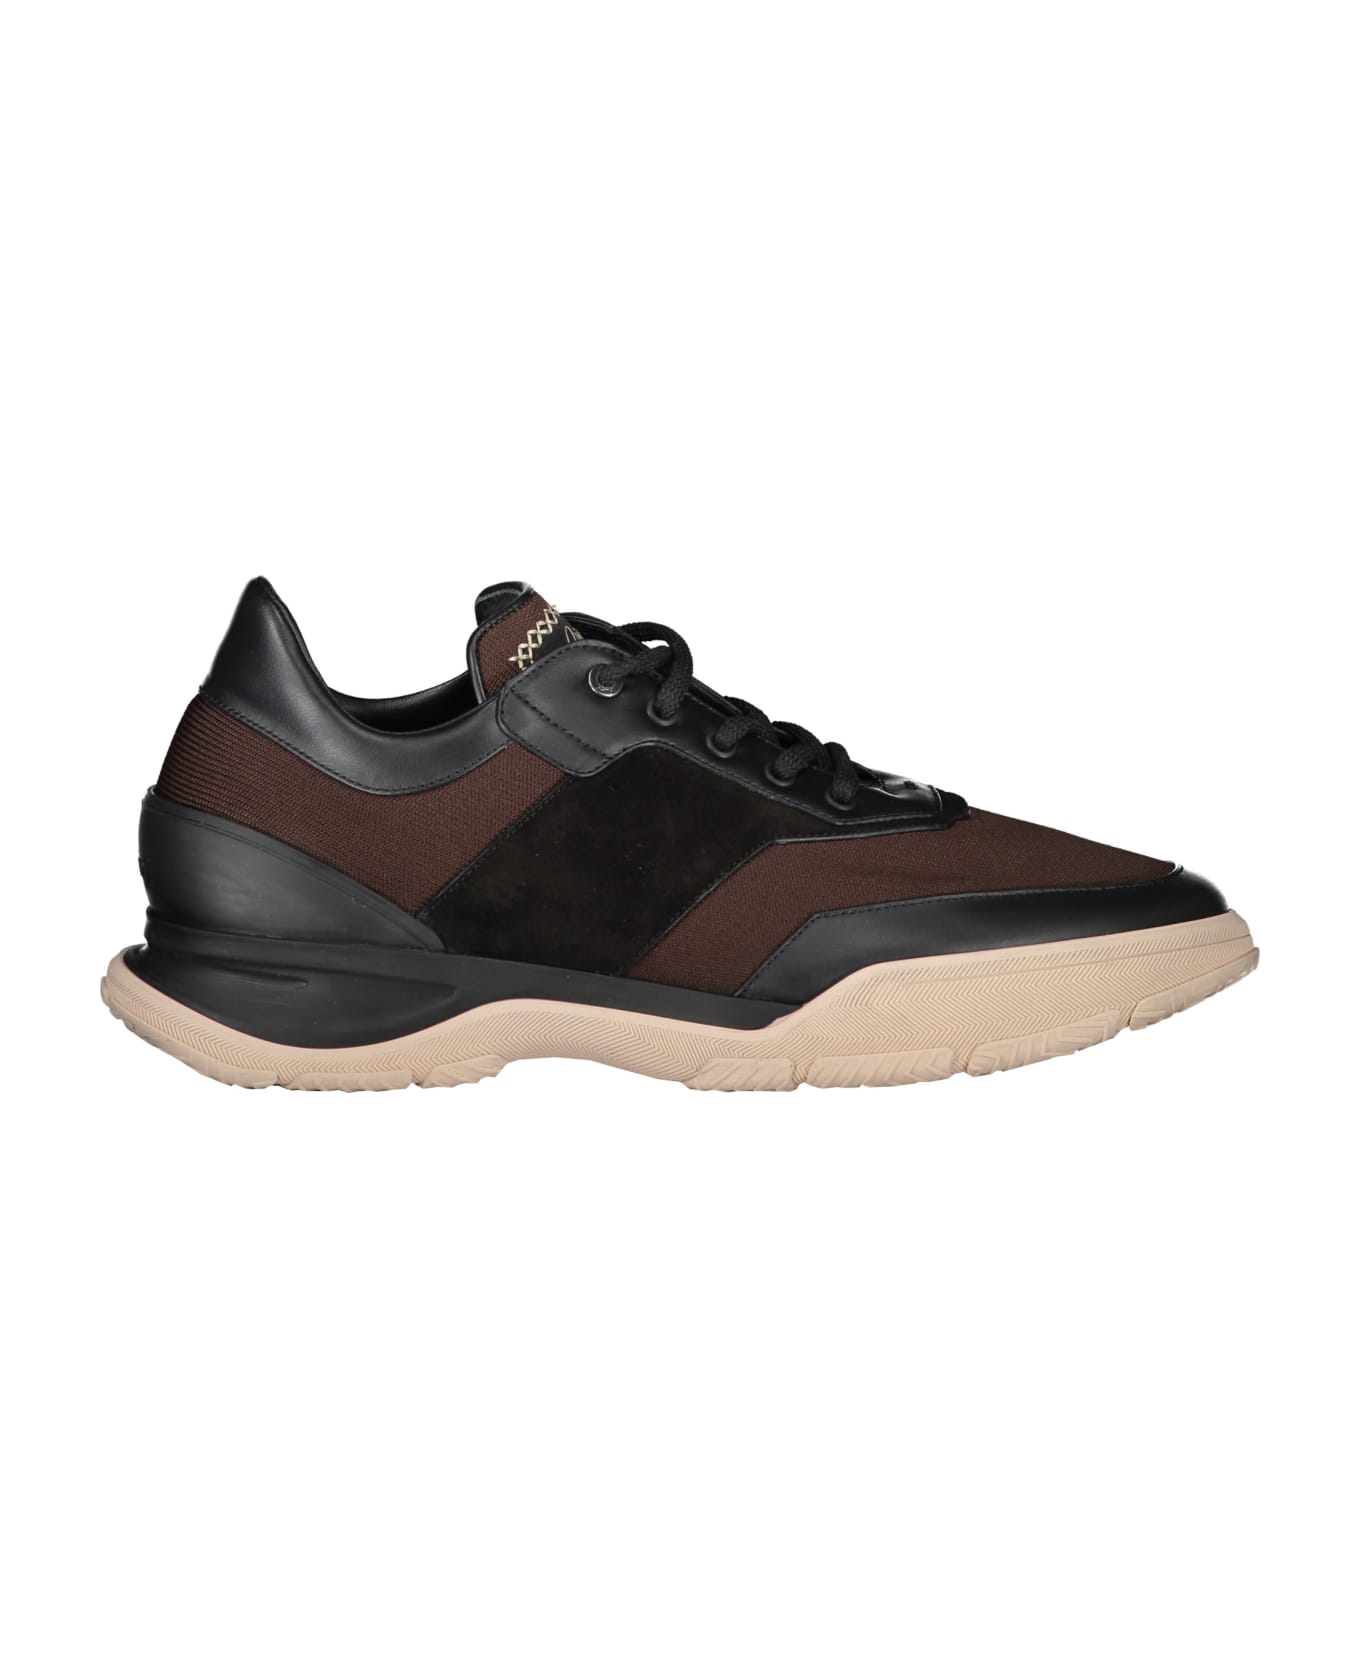 Brioni Leather Sneakers - brown